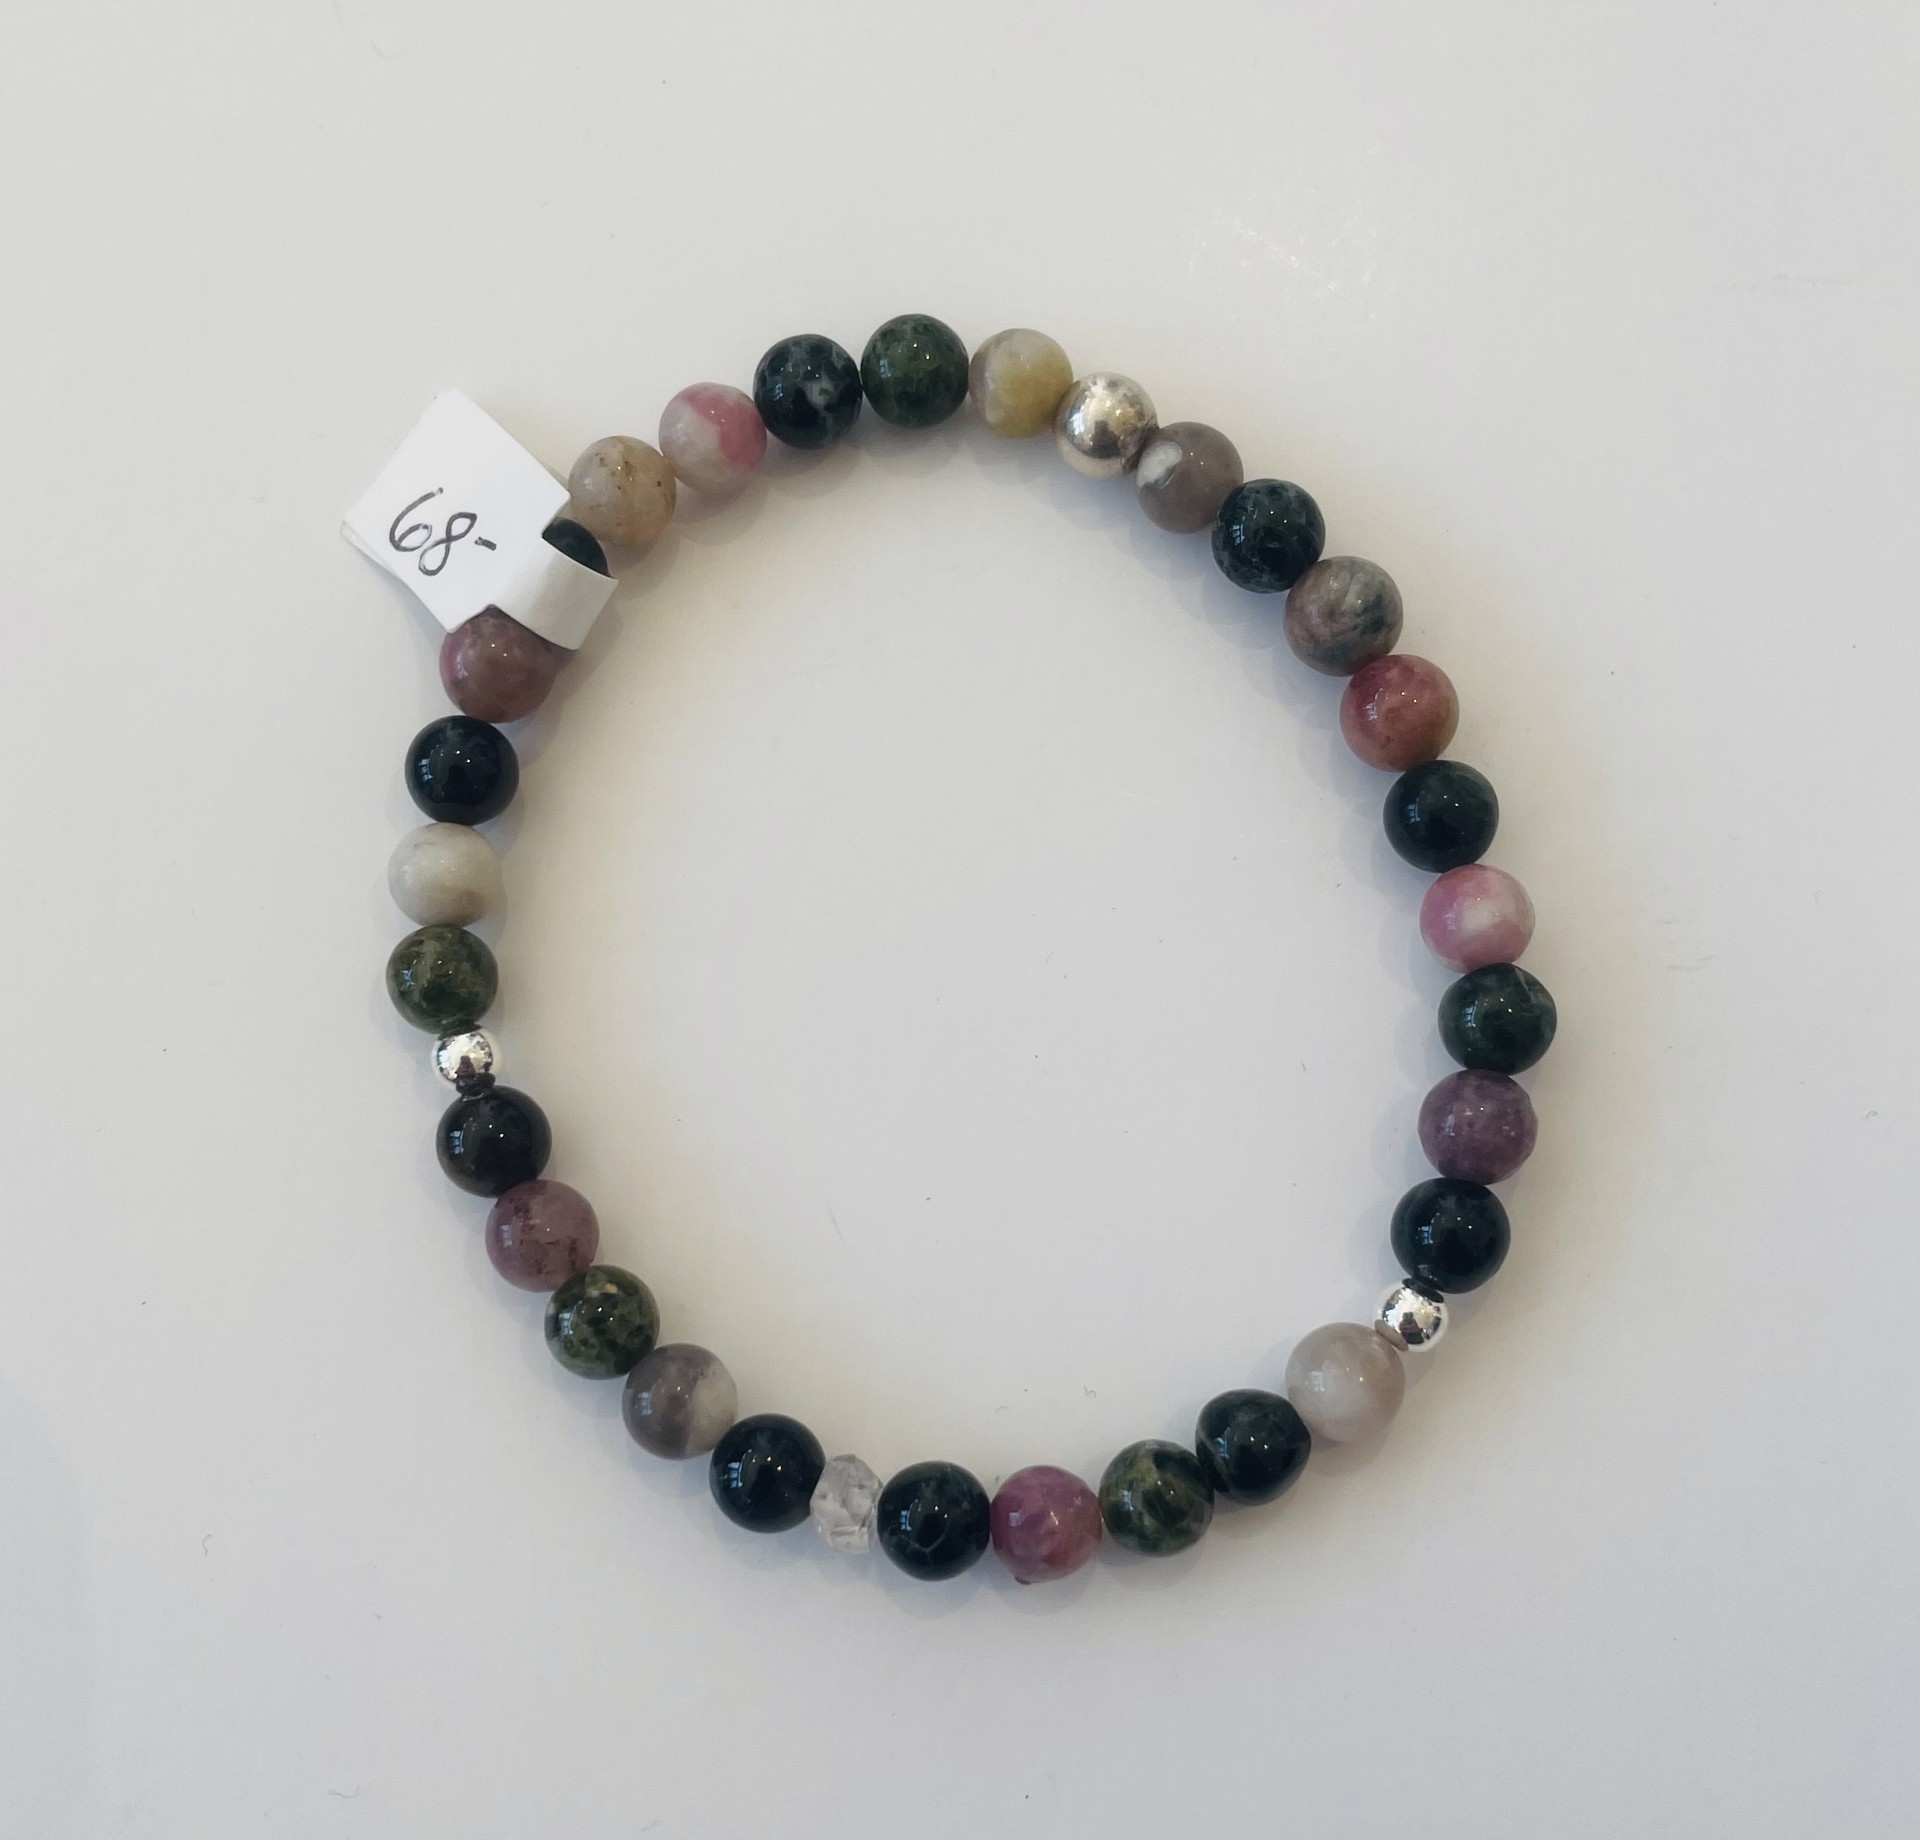 Multicolor Tourmaline with Sterling Beads and Herkimer Diamonds Bracelet by Emelie Hebert